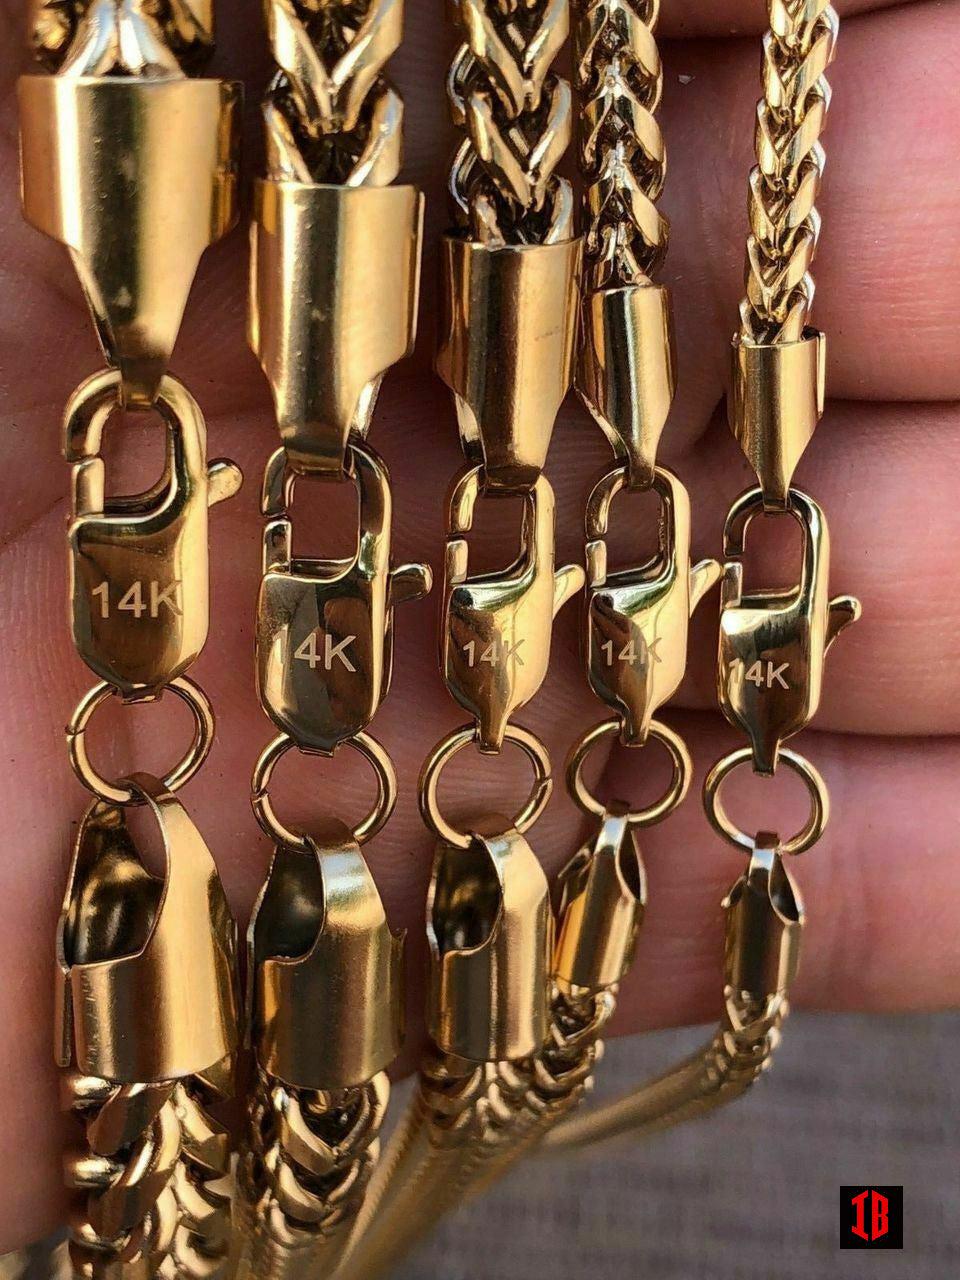 14K YELLOW GOLD Men's Franco Chain 14k Gold Plated Stainless Steel BEST QUALITY! 3-8mm HEAVY!